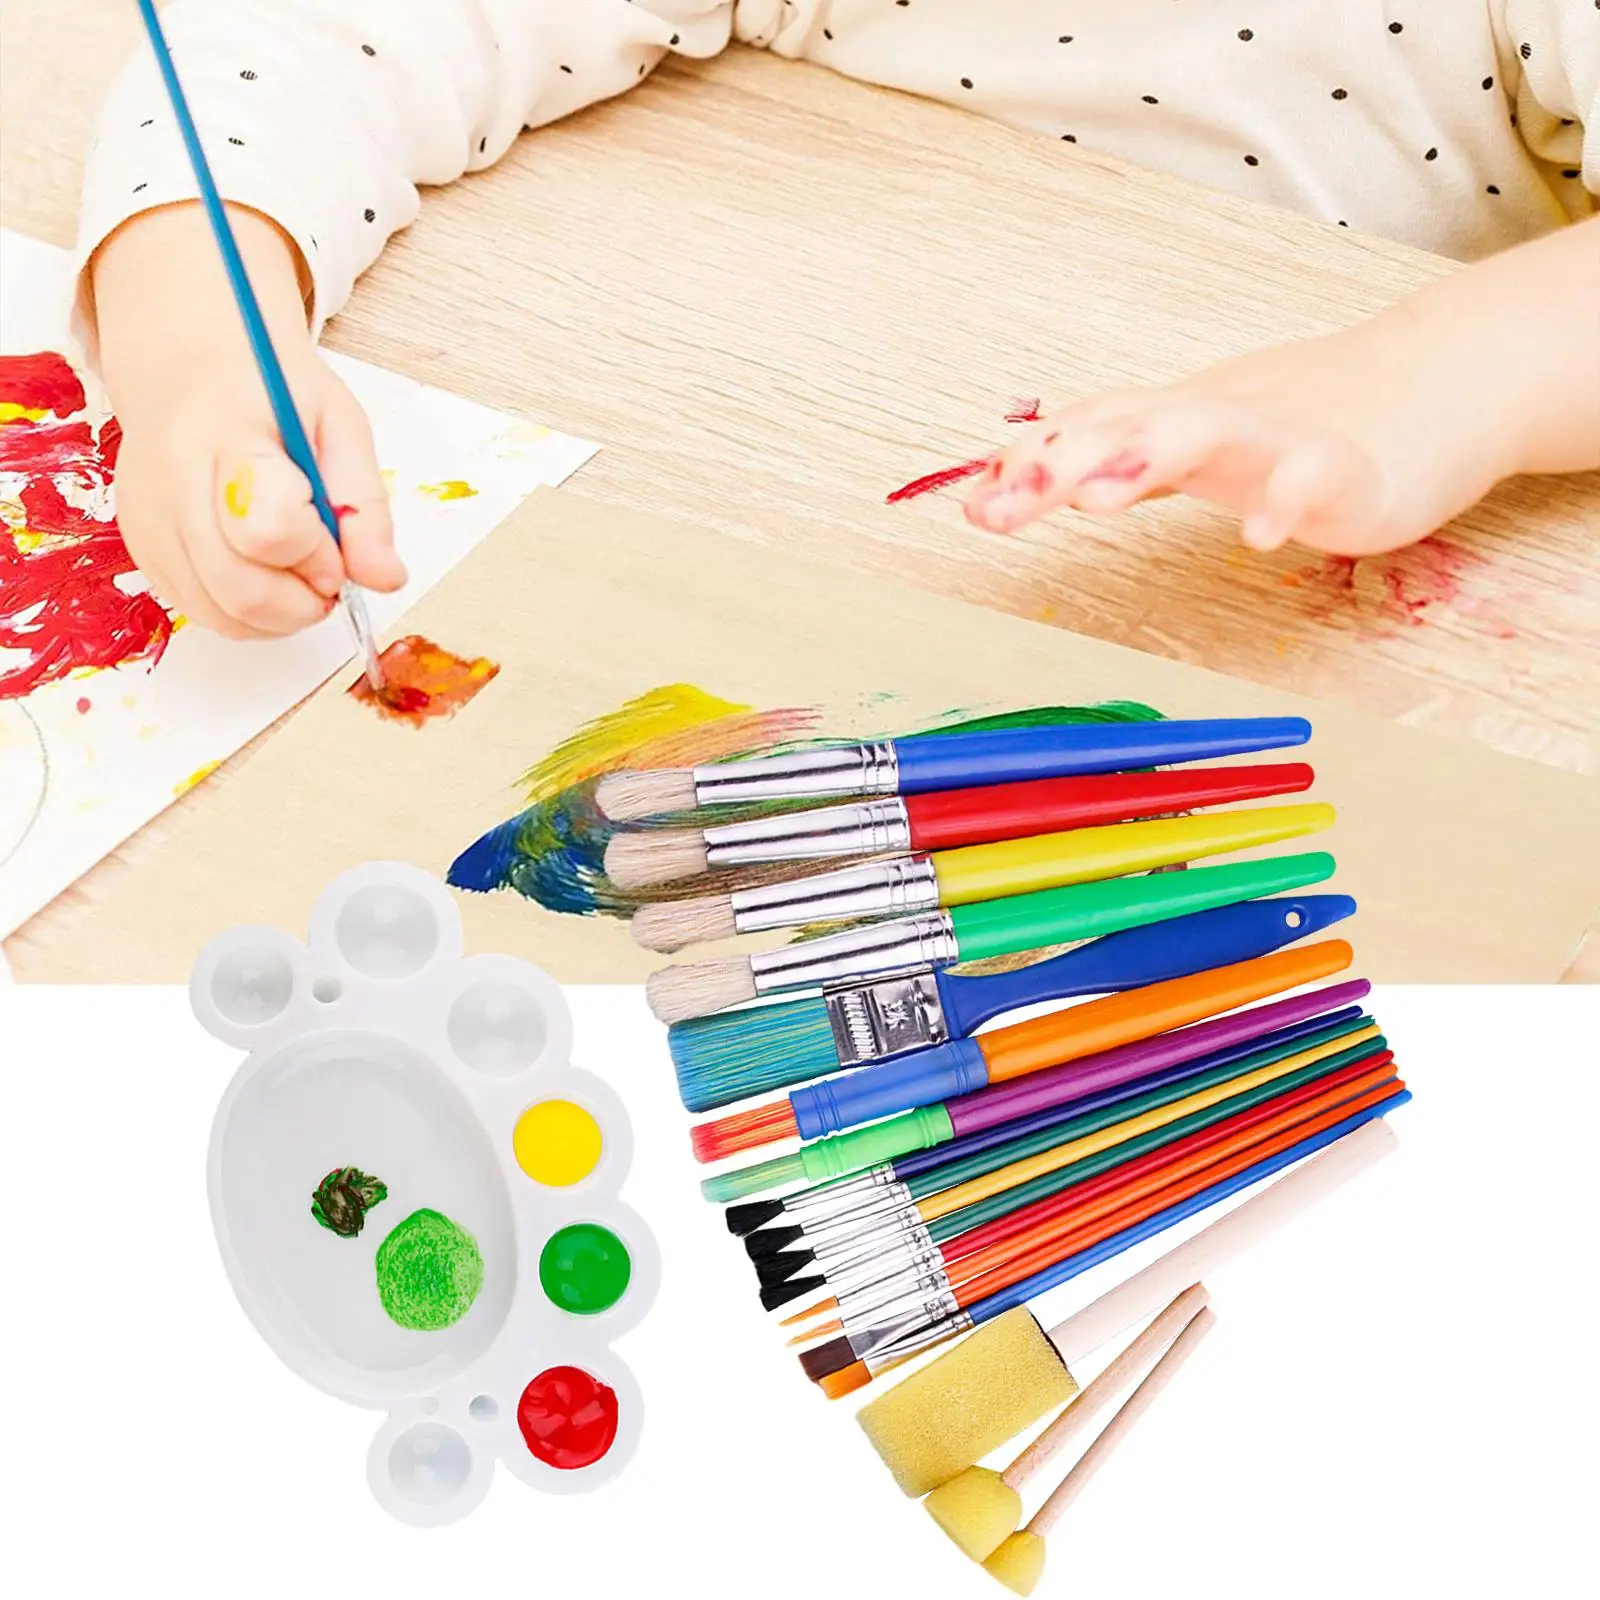 19x Paint Brush Set Watercolor Painting Boys and Girls Children Adults Beginner Lightweight Paintbrushes Painting Brushes